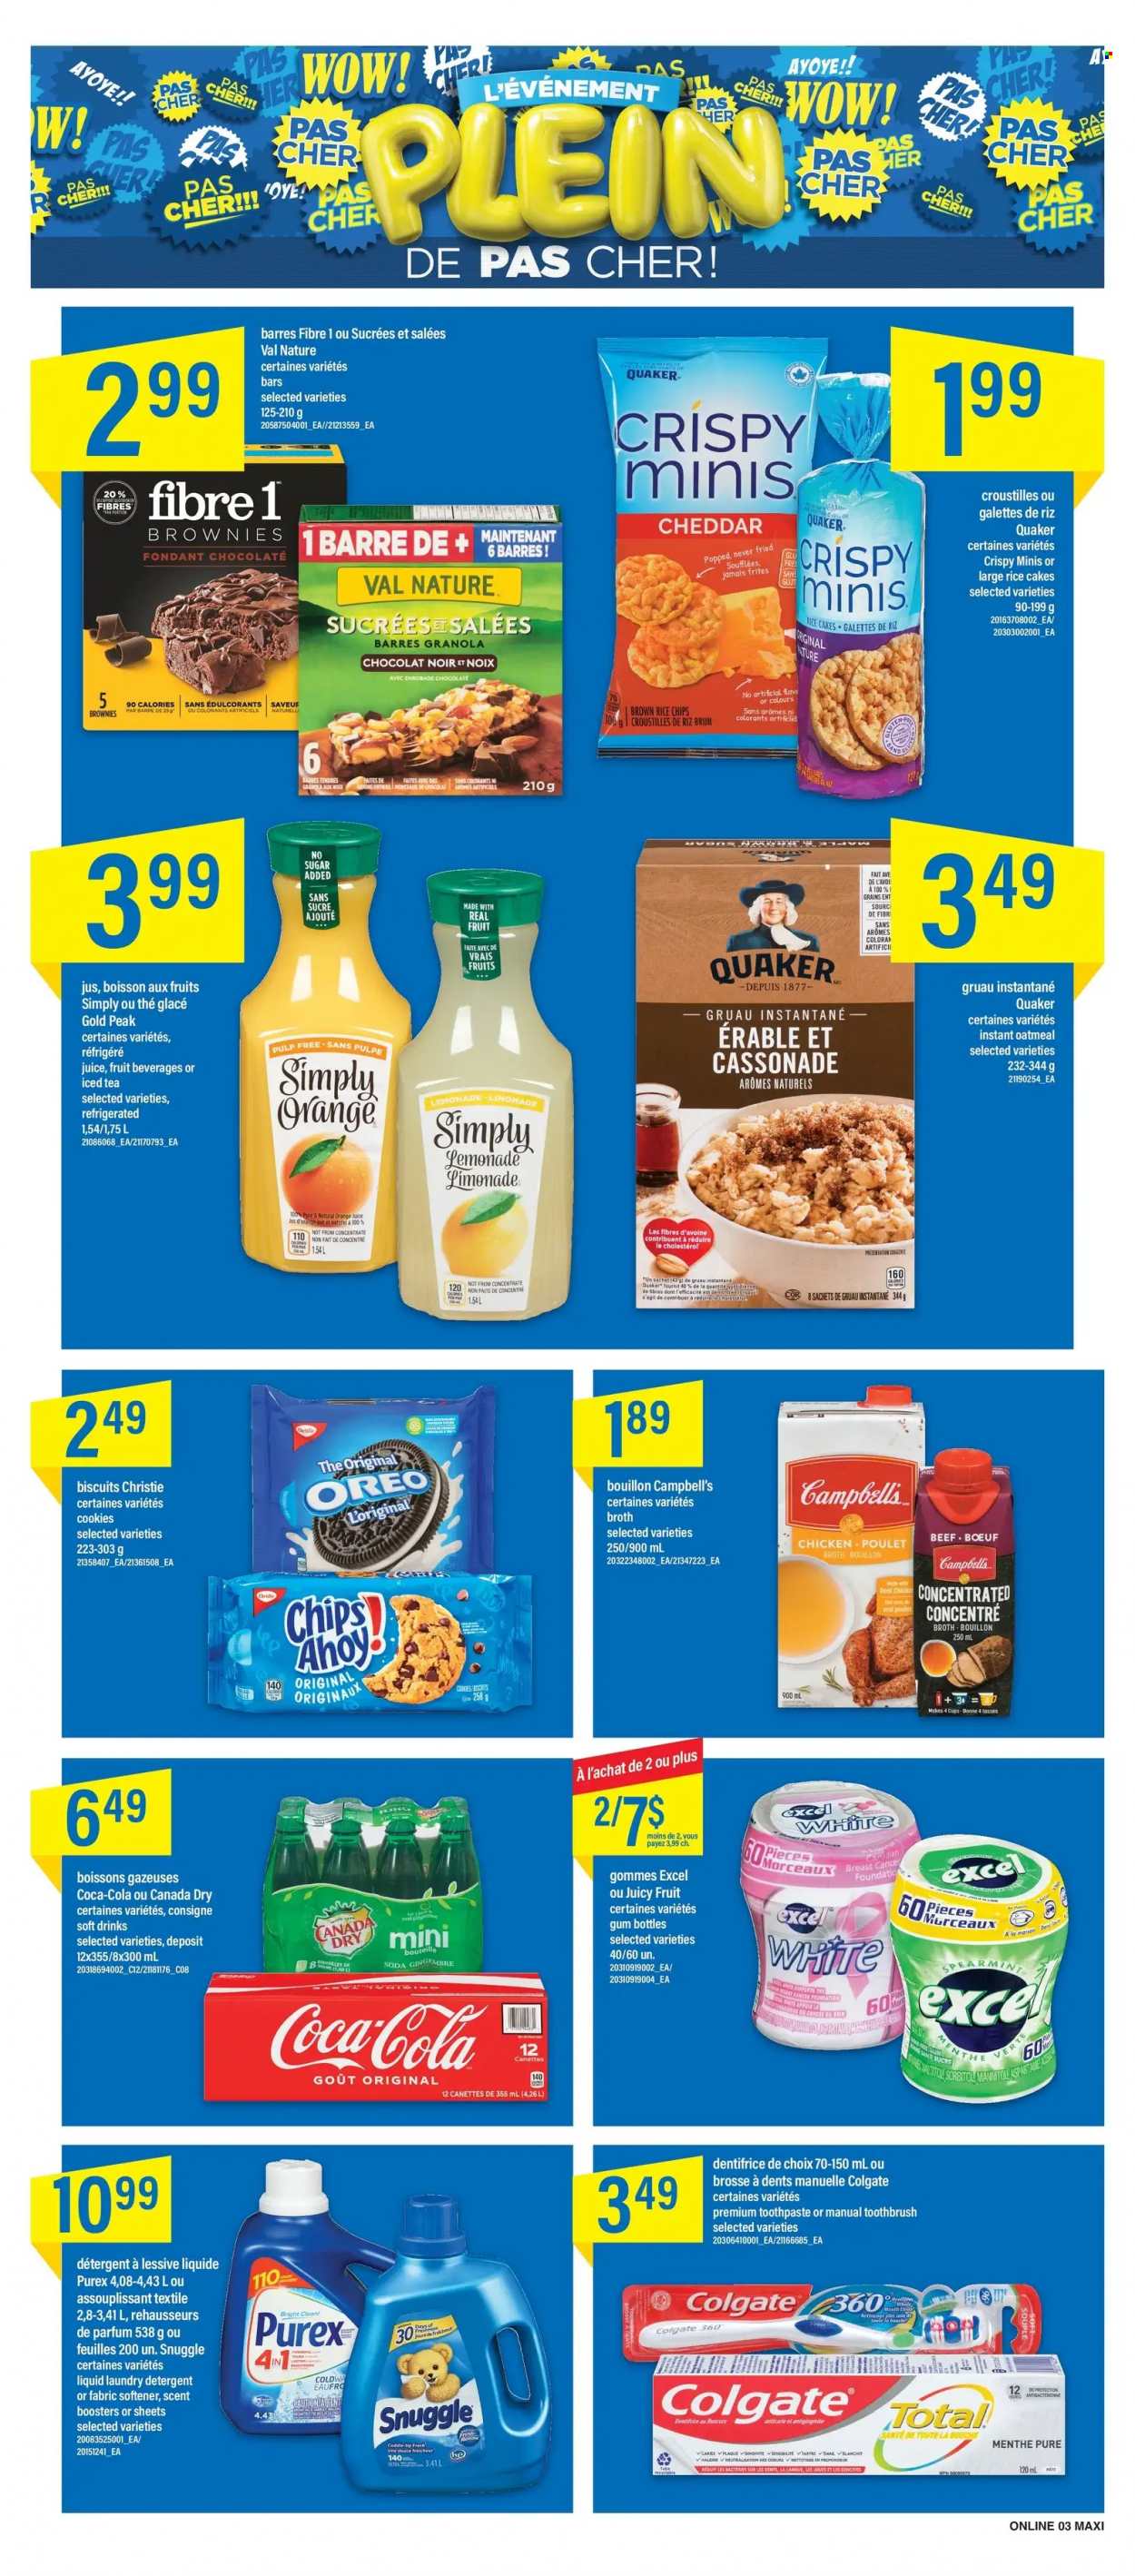 thumbnail - Maxi Flyer - January 26, 2023 - February 01, 2023 - Sales products - brownies, Campbell's, Quaker, cheese, cookies, chocolate, biscuit, chips, bouillon, oatmeal, broth, brown rice, Canada Dry, Coca-Cola, lemonade, orange juice, juice, ice tea, soft drink, soda, Snuggle, fabric softener, laundry detergent, scent booster, Purex, toothbrush, toothpaste, eau de parfum, detergent, Colgate, granola, Oreo. Page 14.